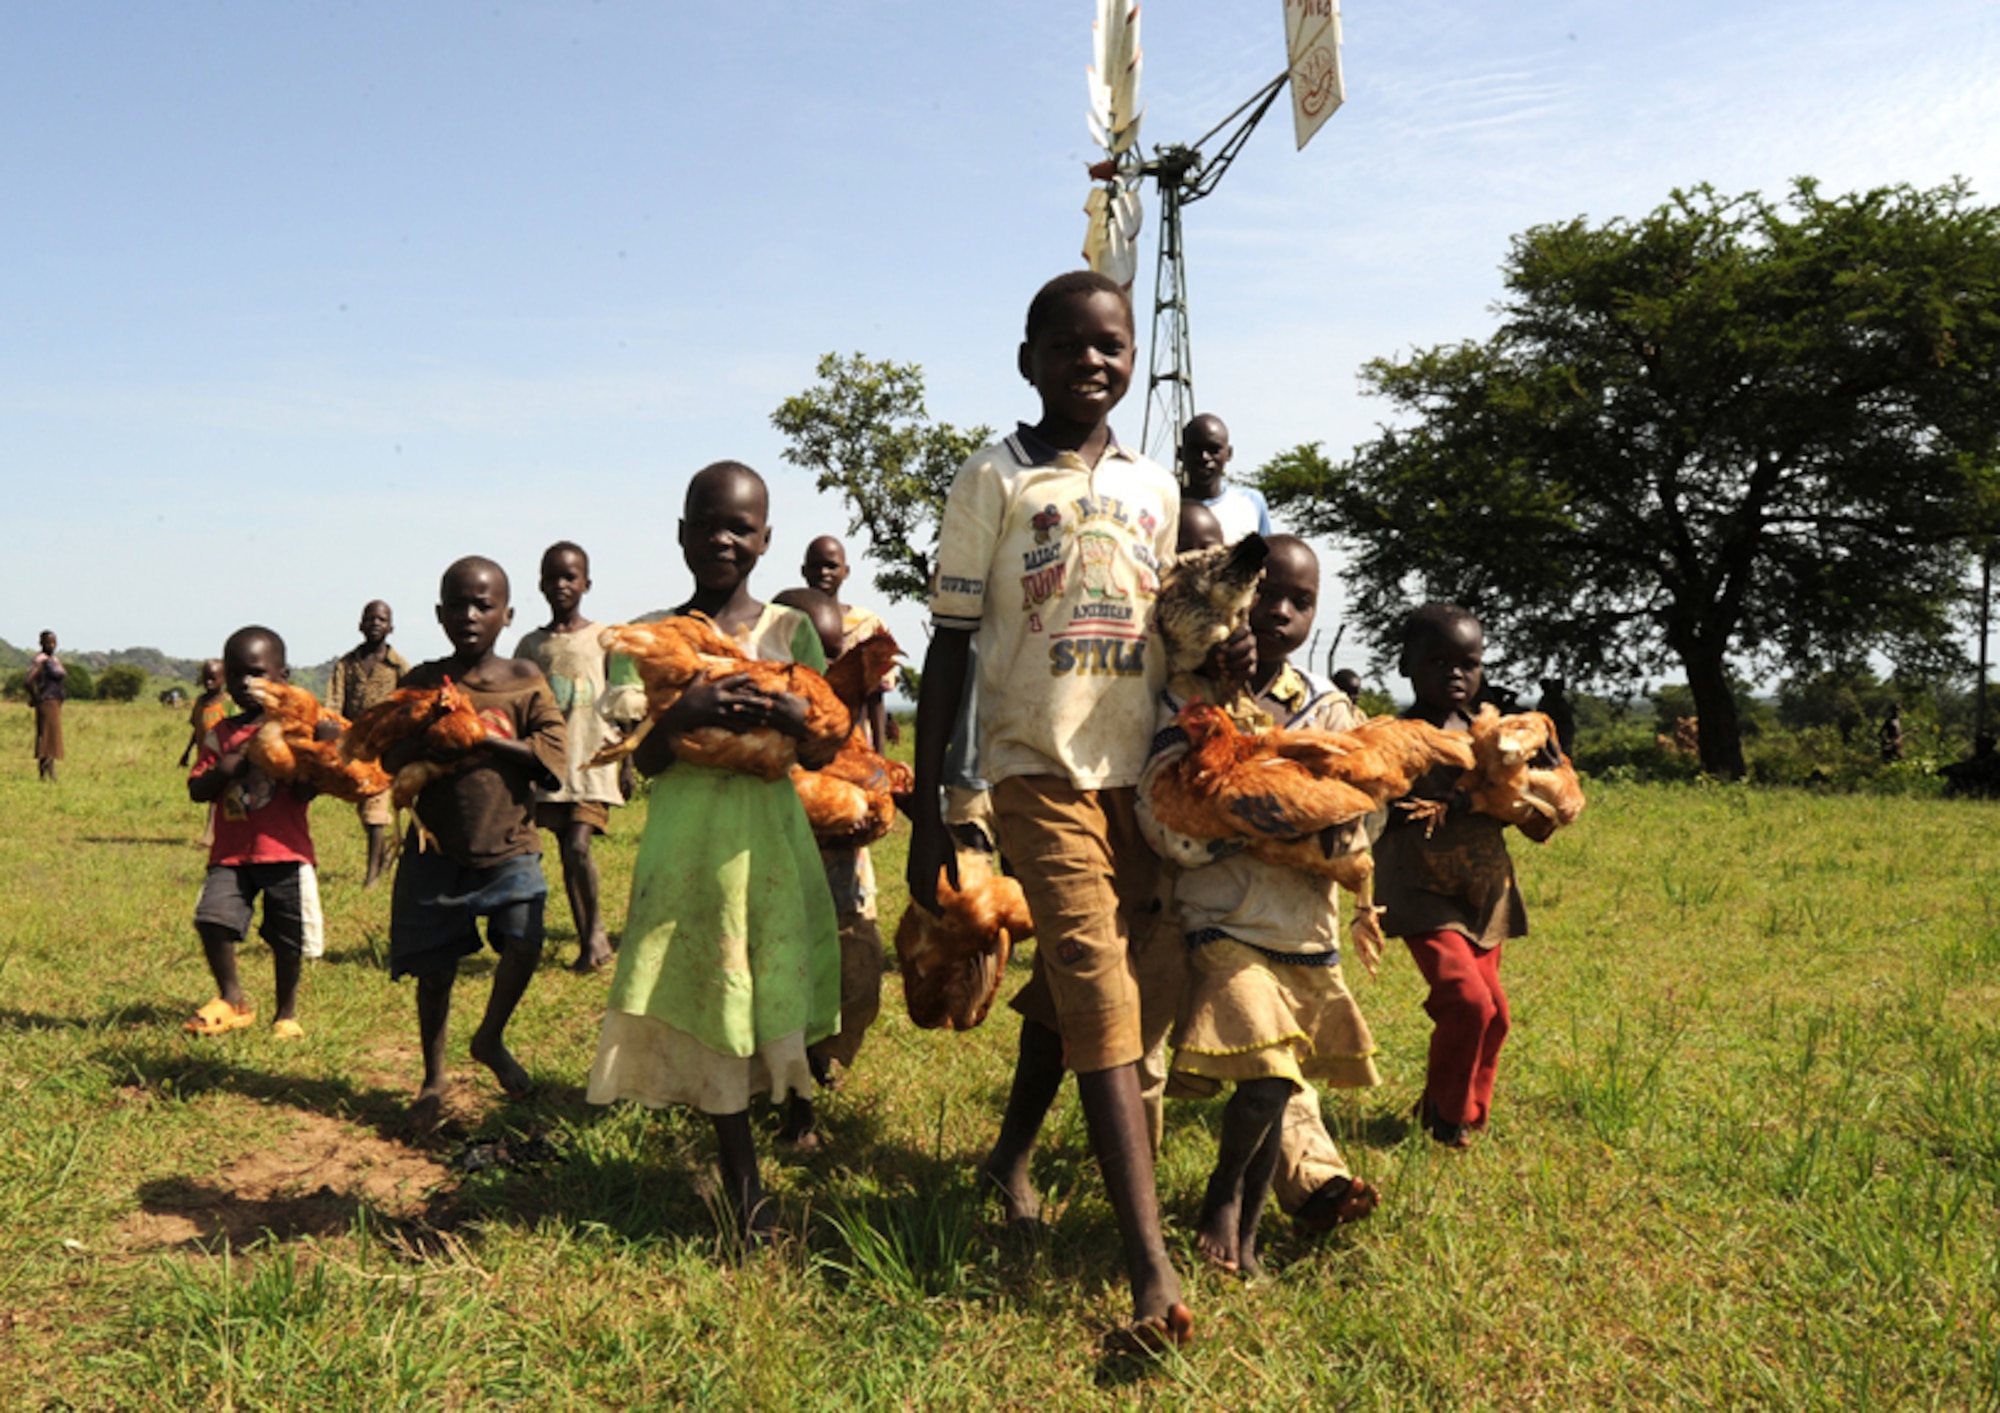 Children deliver their chickens for inoculations with U.S. Army veterinarians from Combined Joint Task Force Horn of Africa during a mission in the remote Karamoja region of Uganda. (U.S. Air Force Photo/Master Sgt Dawn Price)